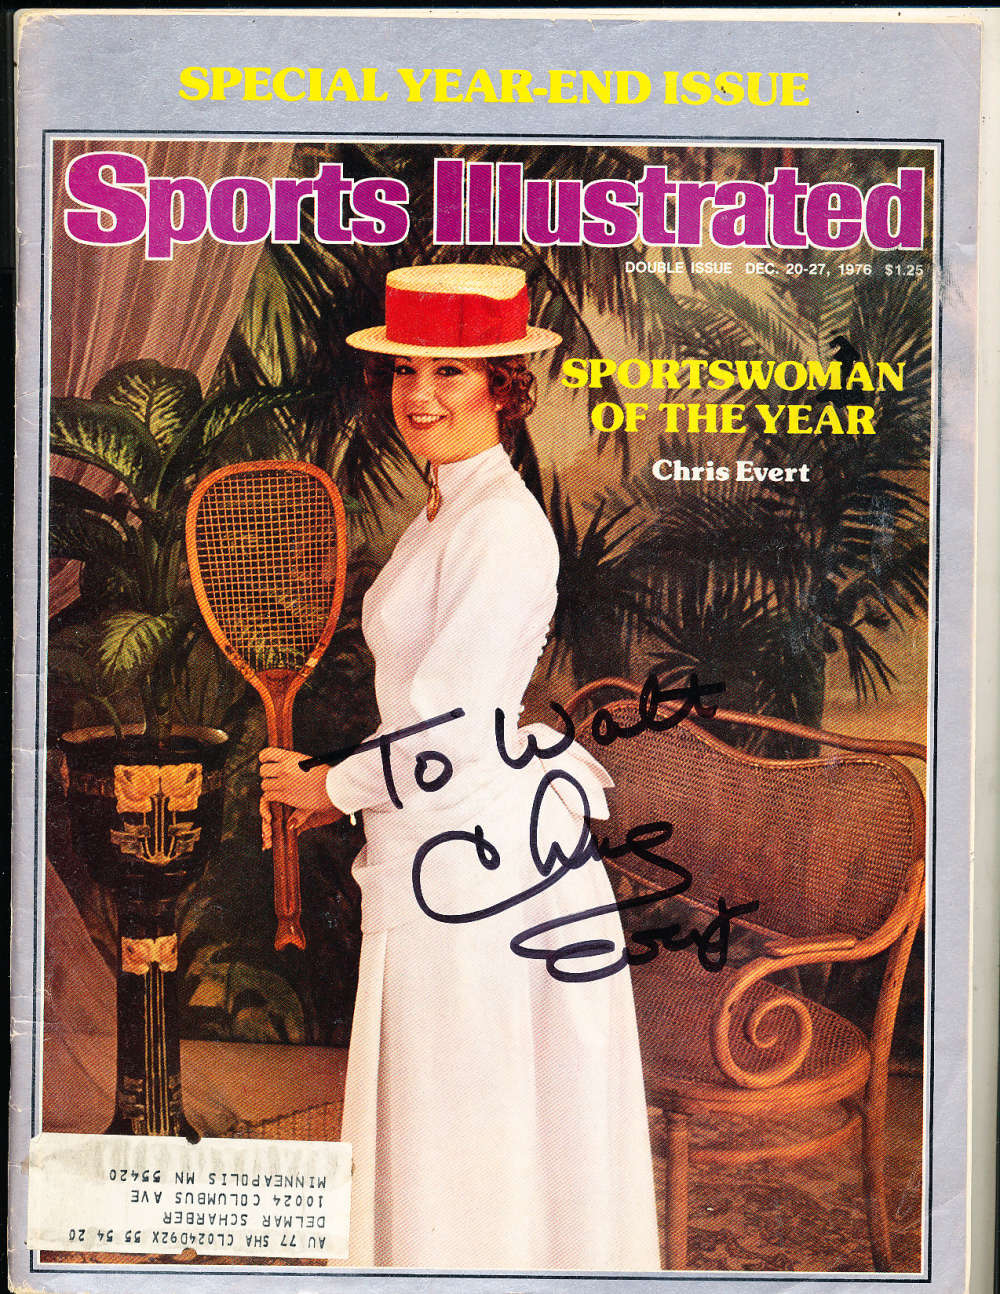 12/20 1976 Chris Evert Sportsman Signed sports Illustrated pers.